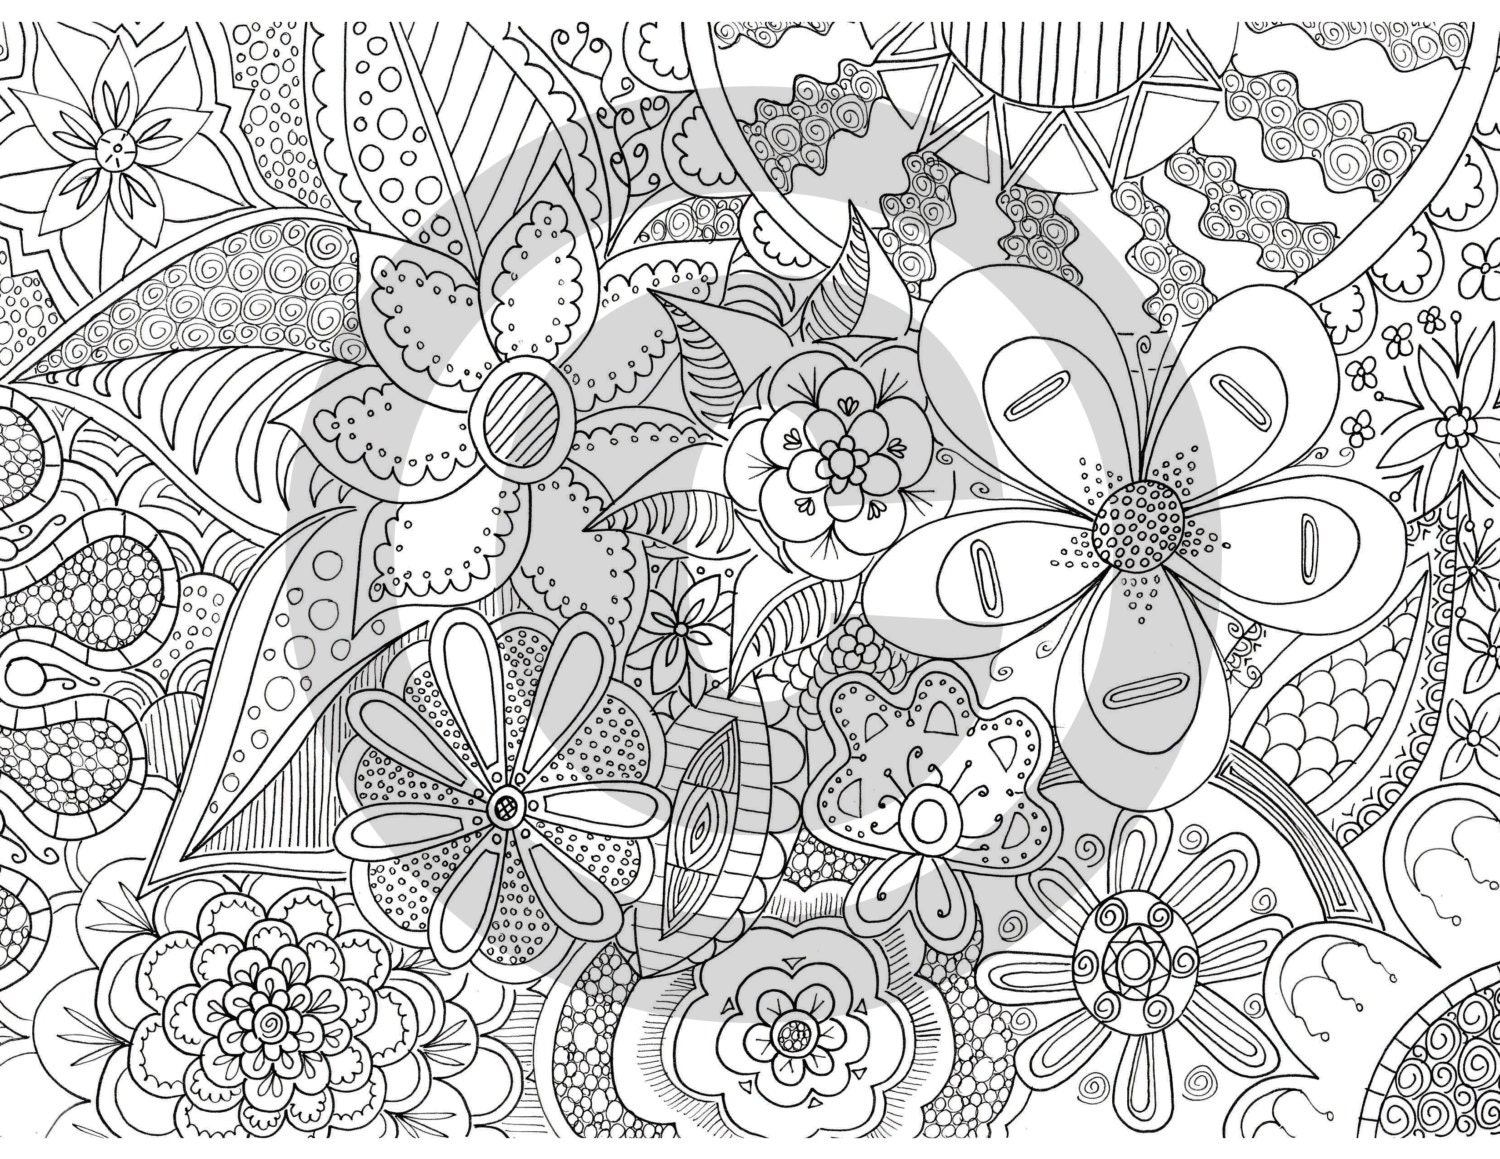 6 Best Images of Zen Art Coloring Pages Printable Printable Doodle